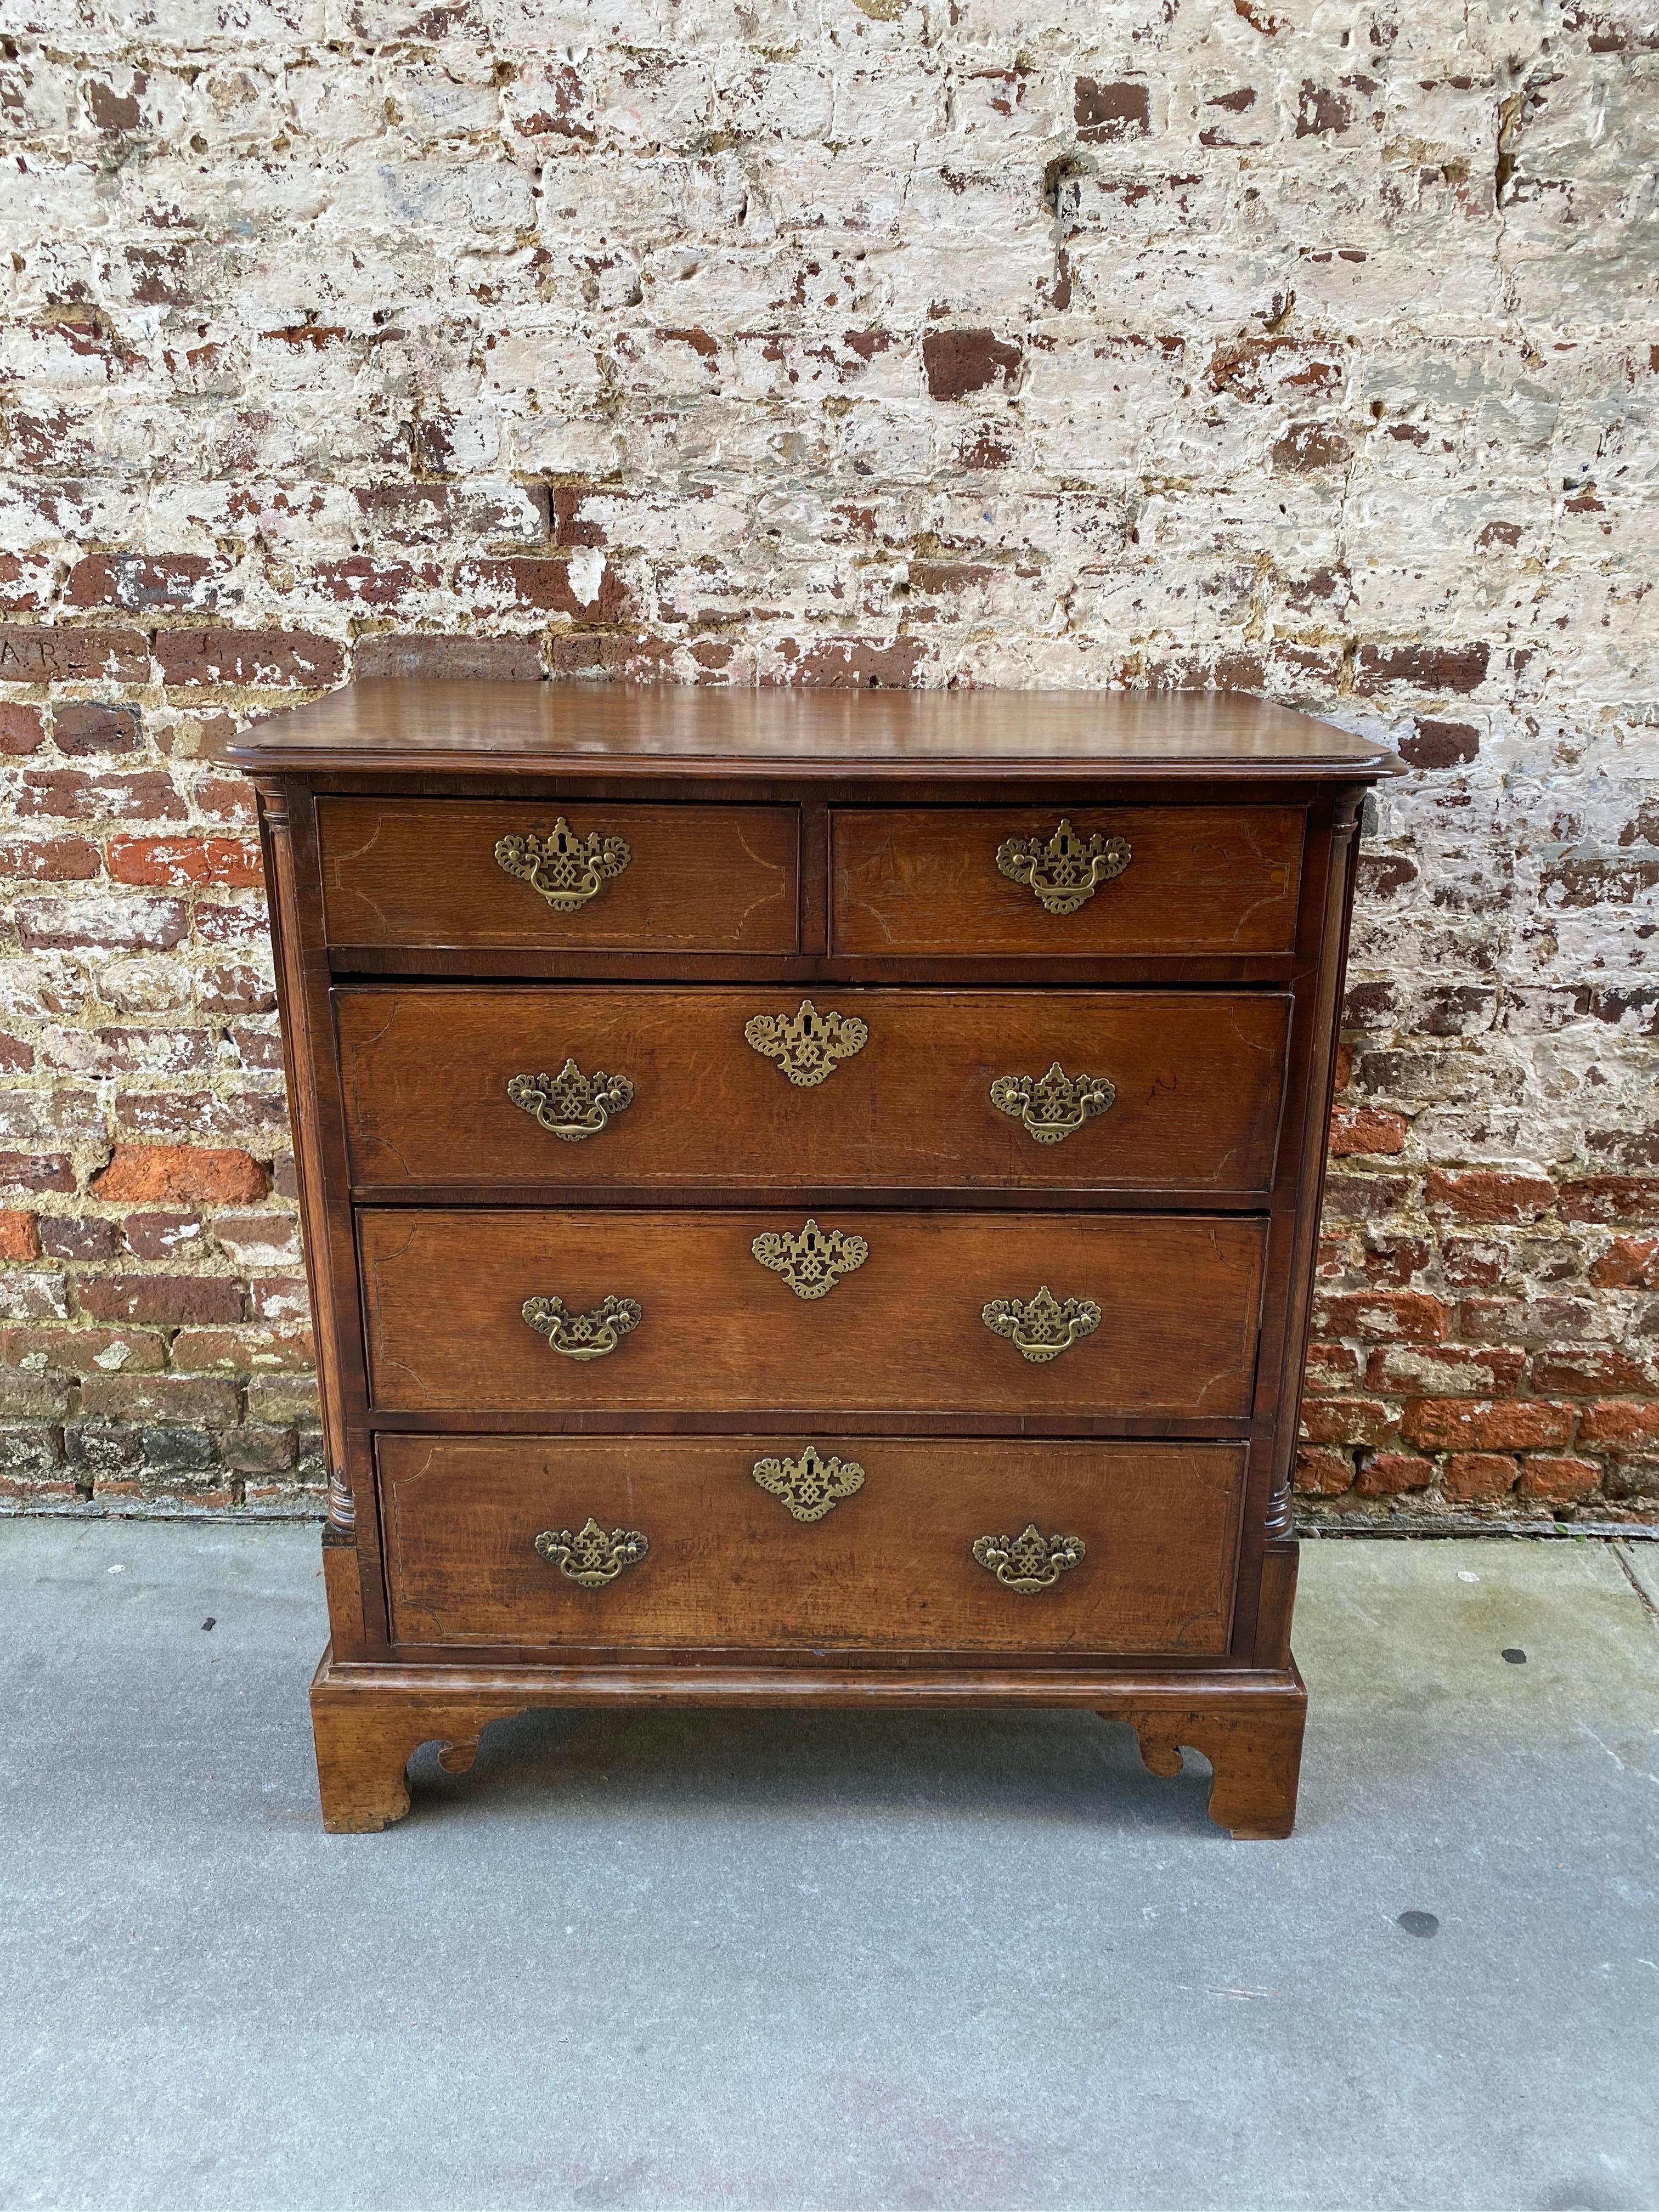 English oak inlaid chest with very unique fitted desk in second drawer. Original bracket feet, original pulls, and lovely fitted second drawer desk. The desk has leather writing surface and incorporates several architectural elements in the